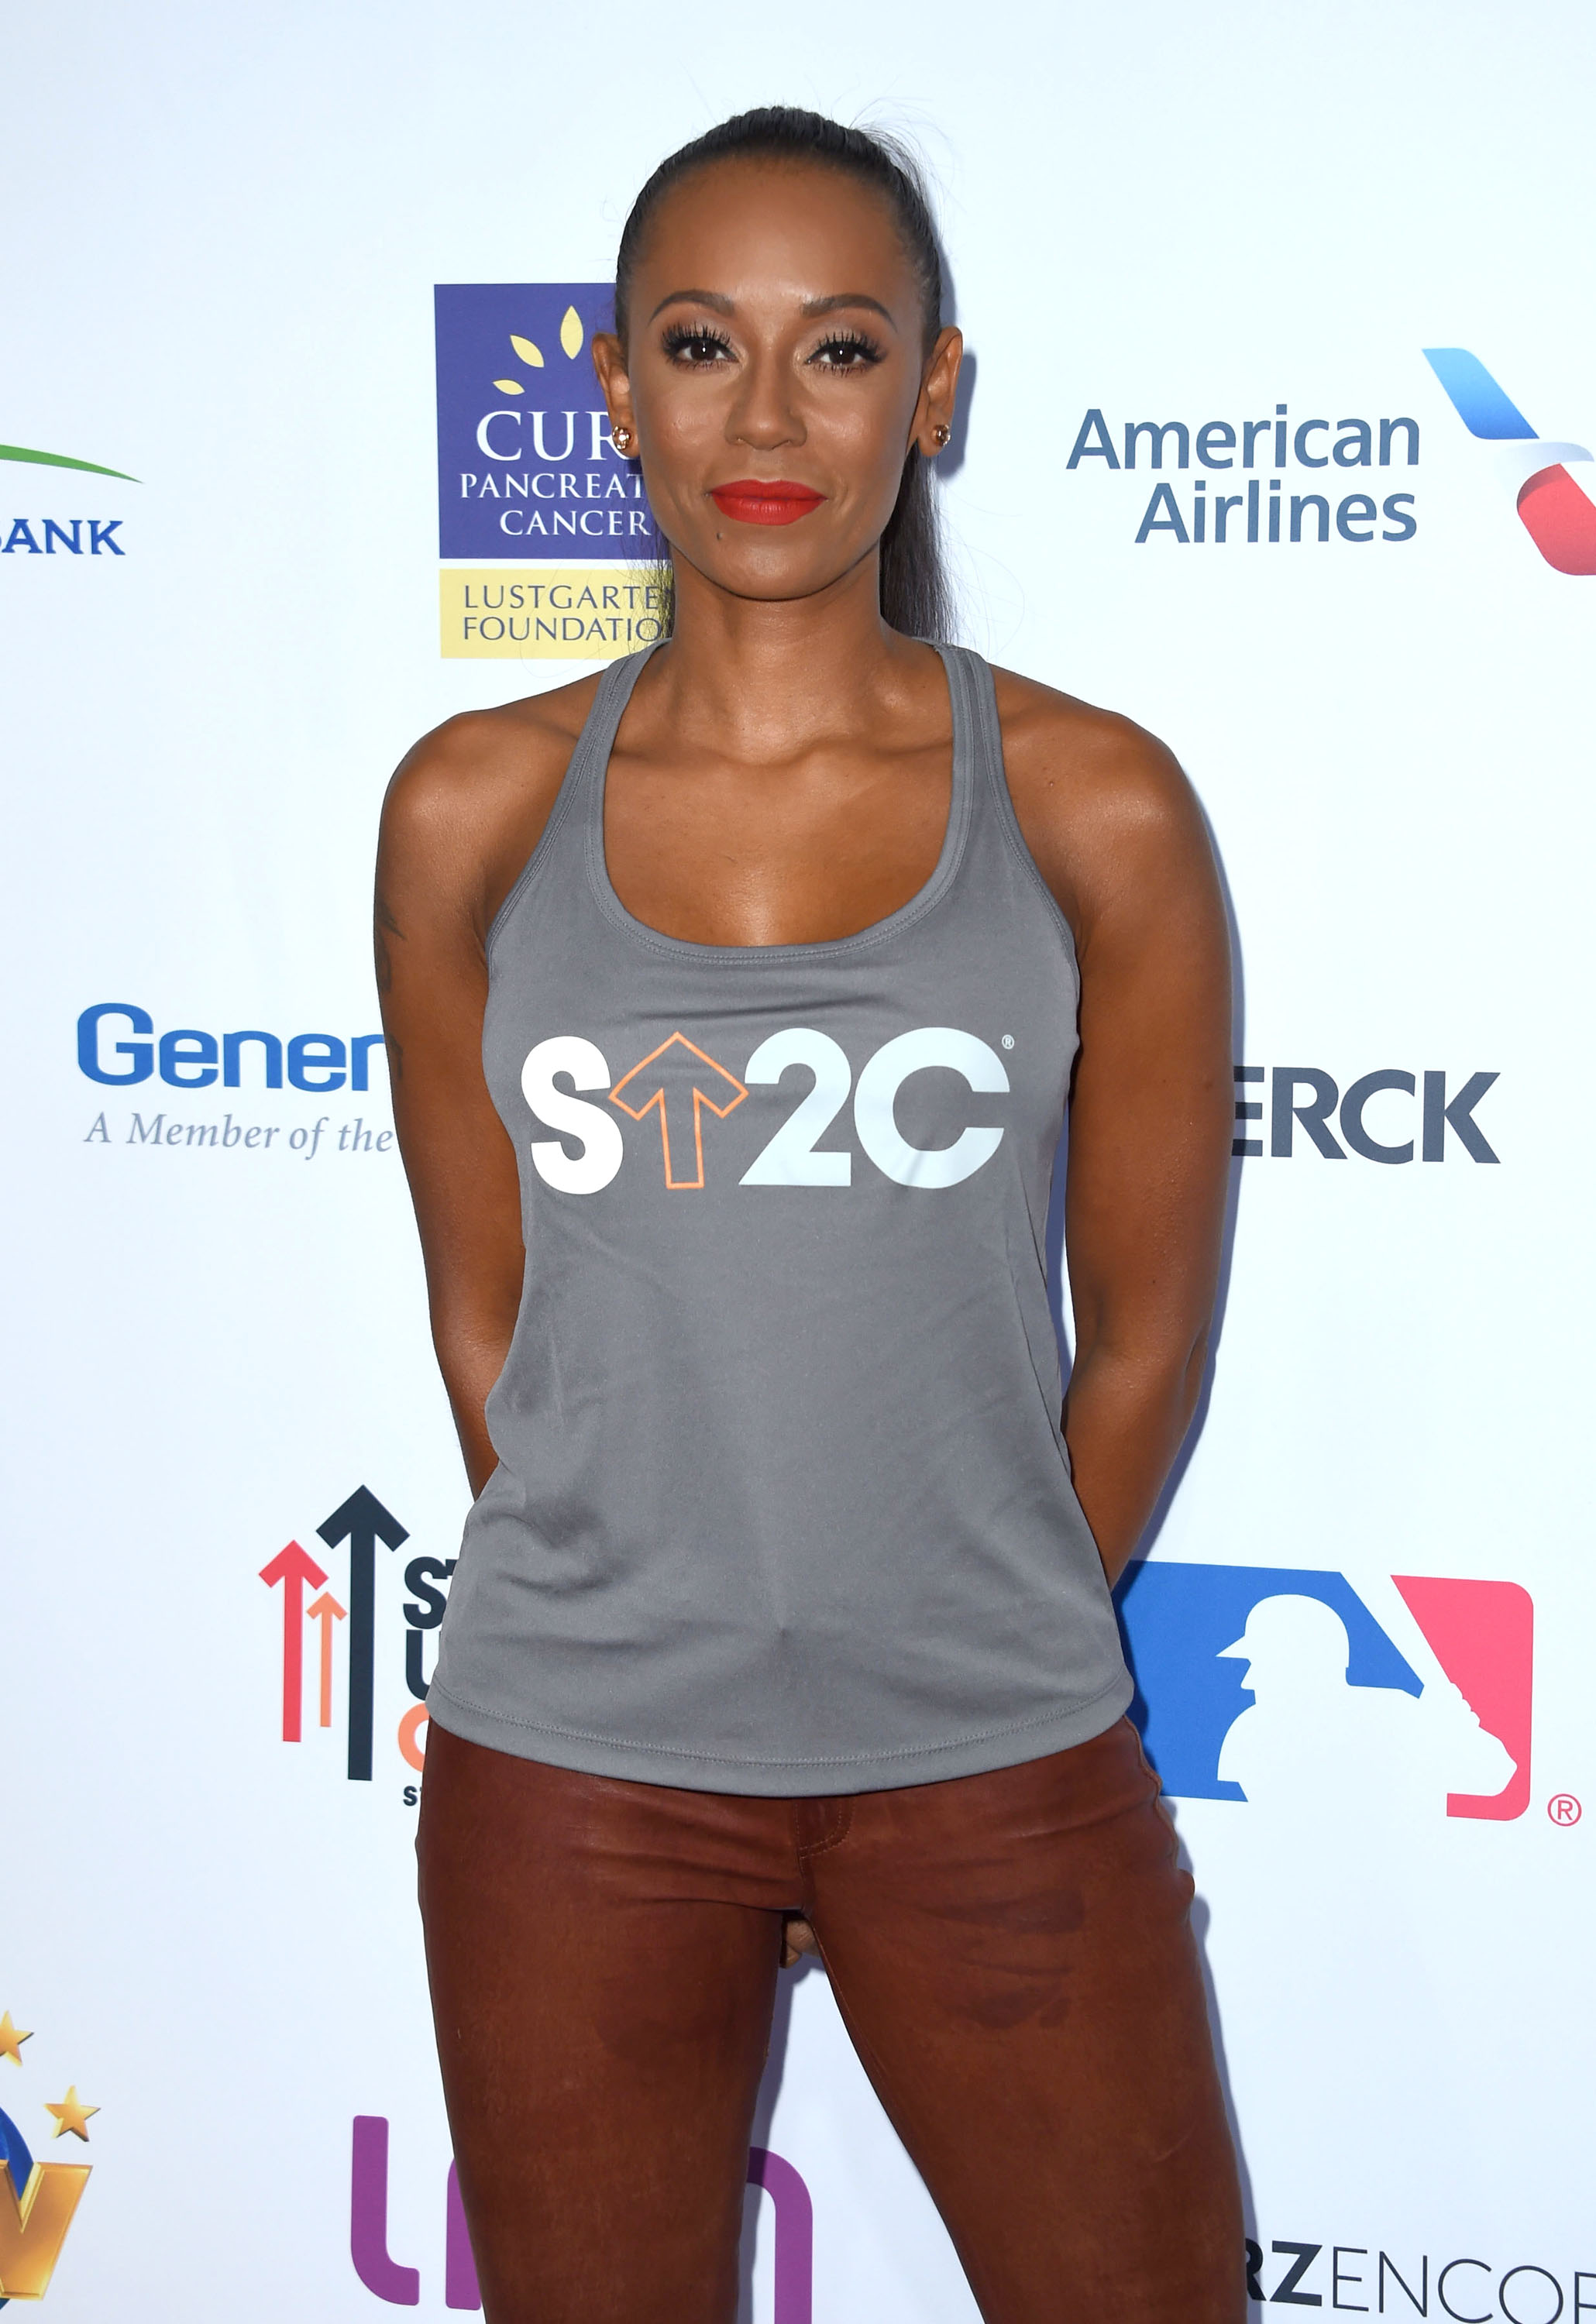 Melanie Brown attends Hollywood Unites for the 5th Biennial Stand Up To Cancer